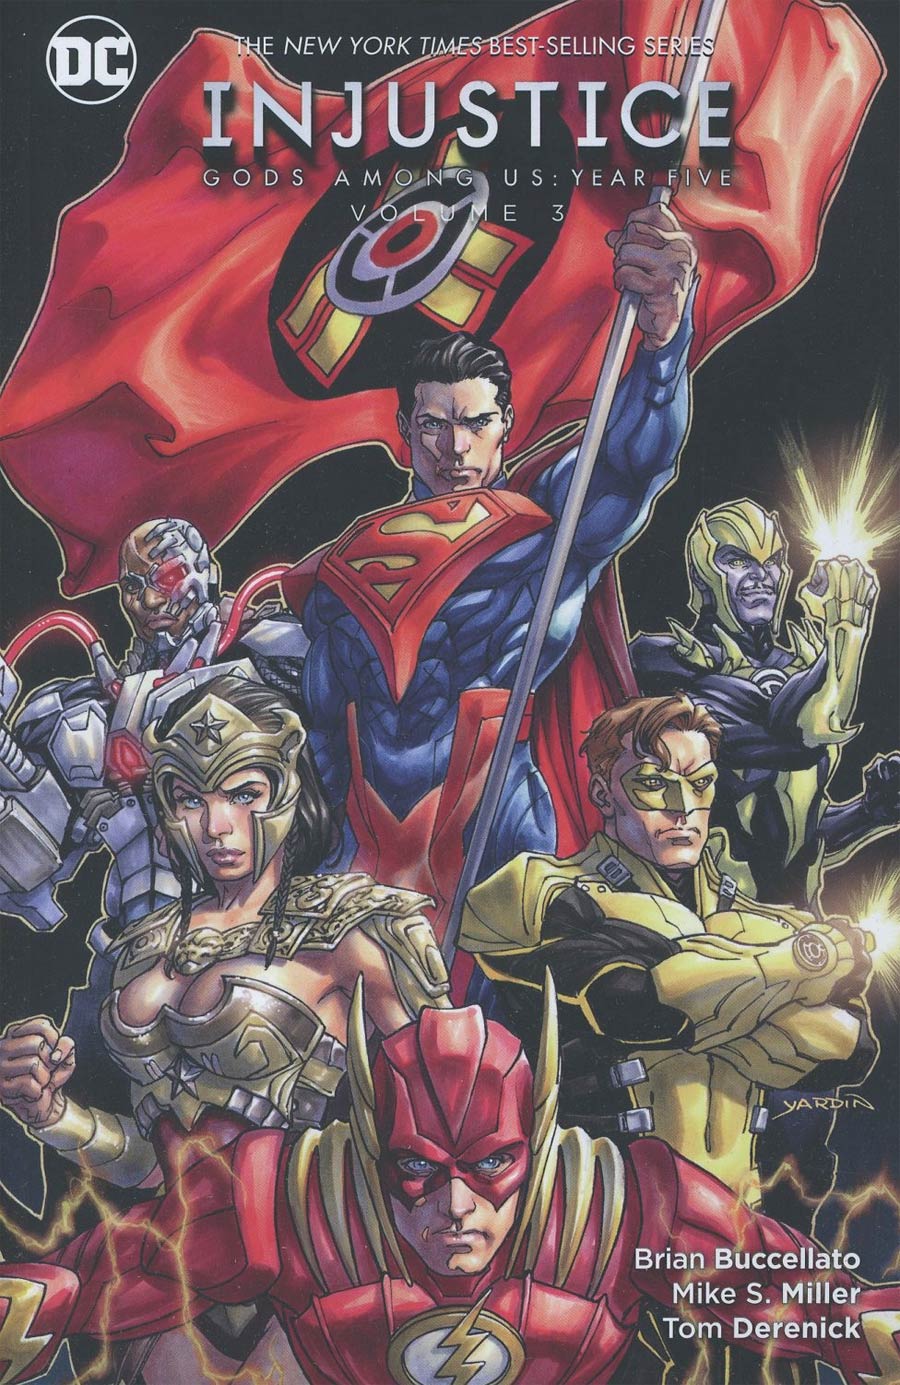 Injustice Gods Among Us Year Five Vol 3 TP